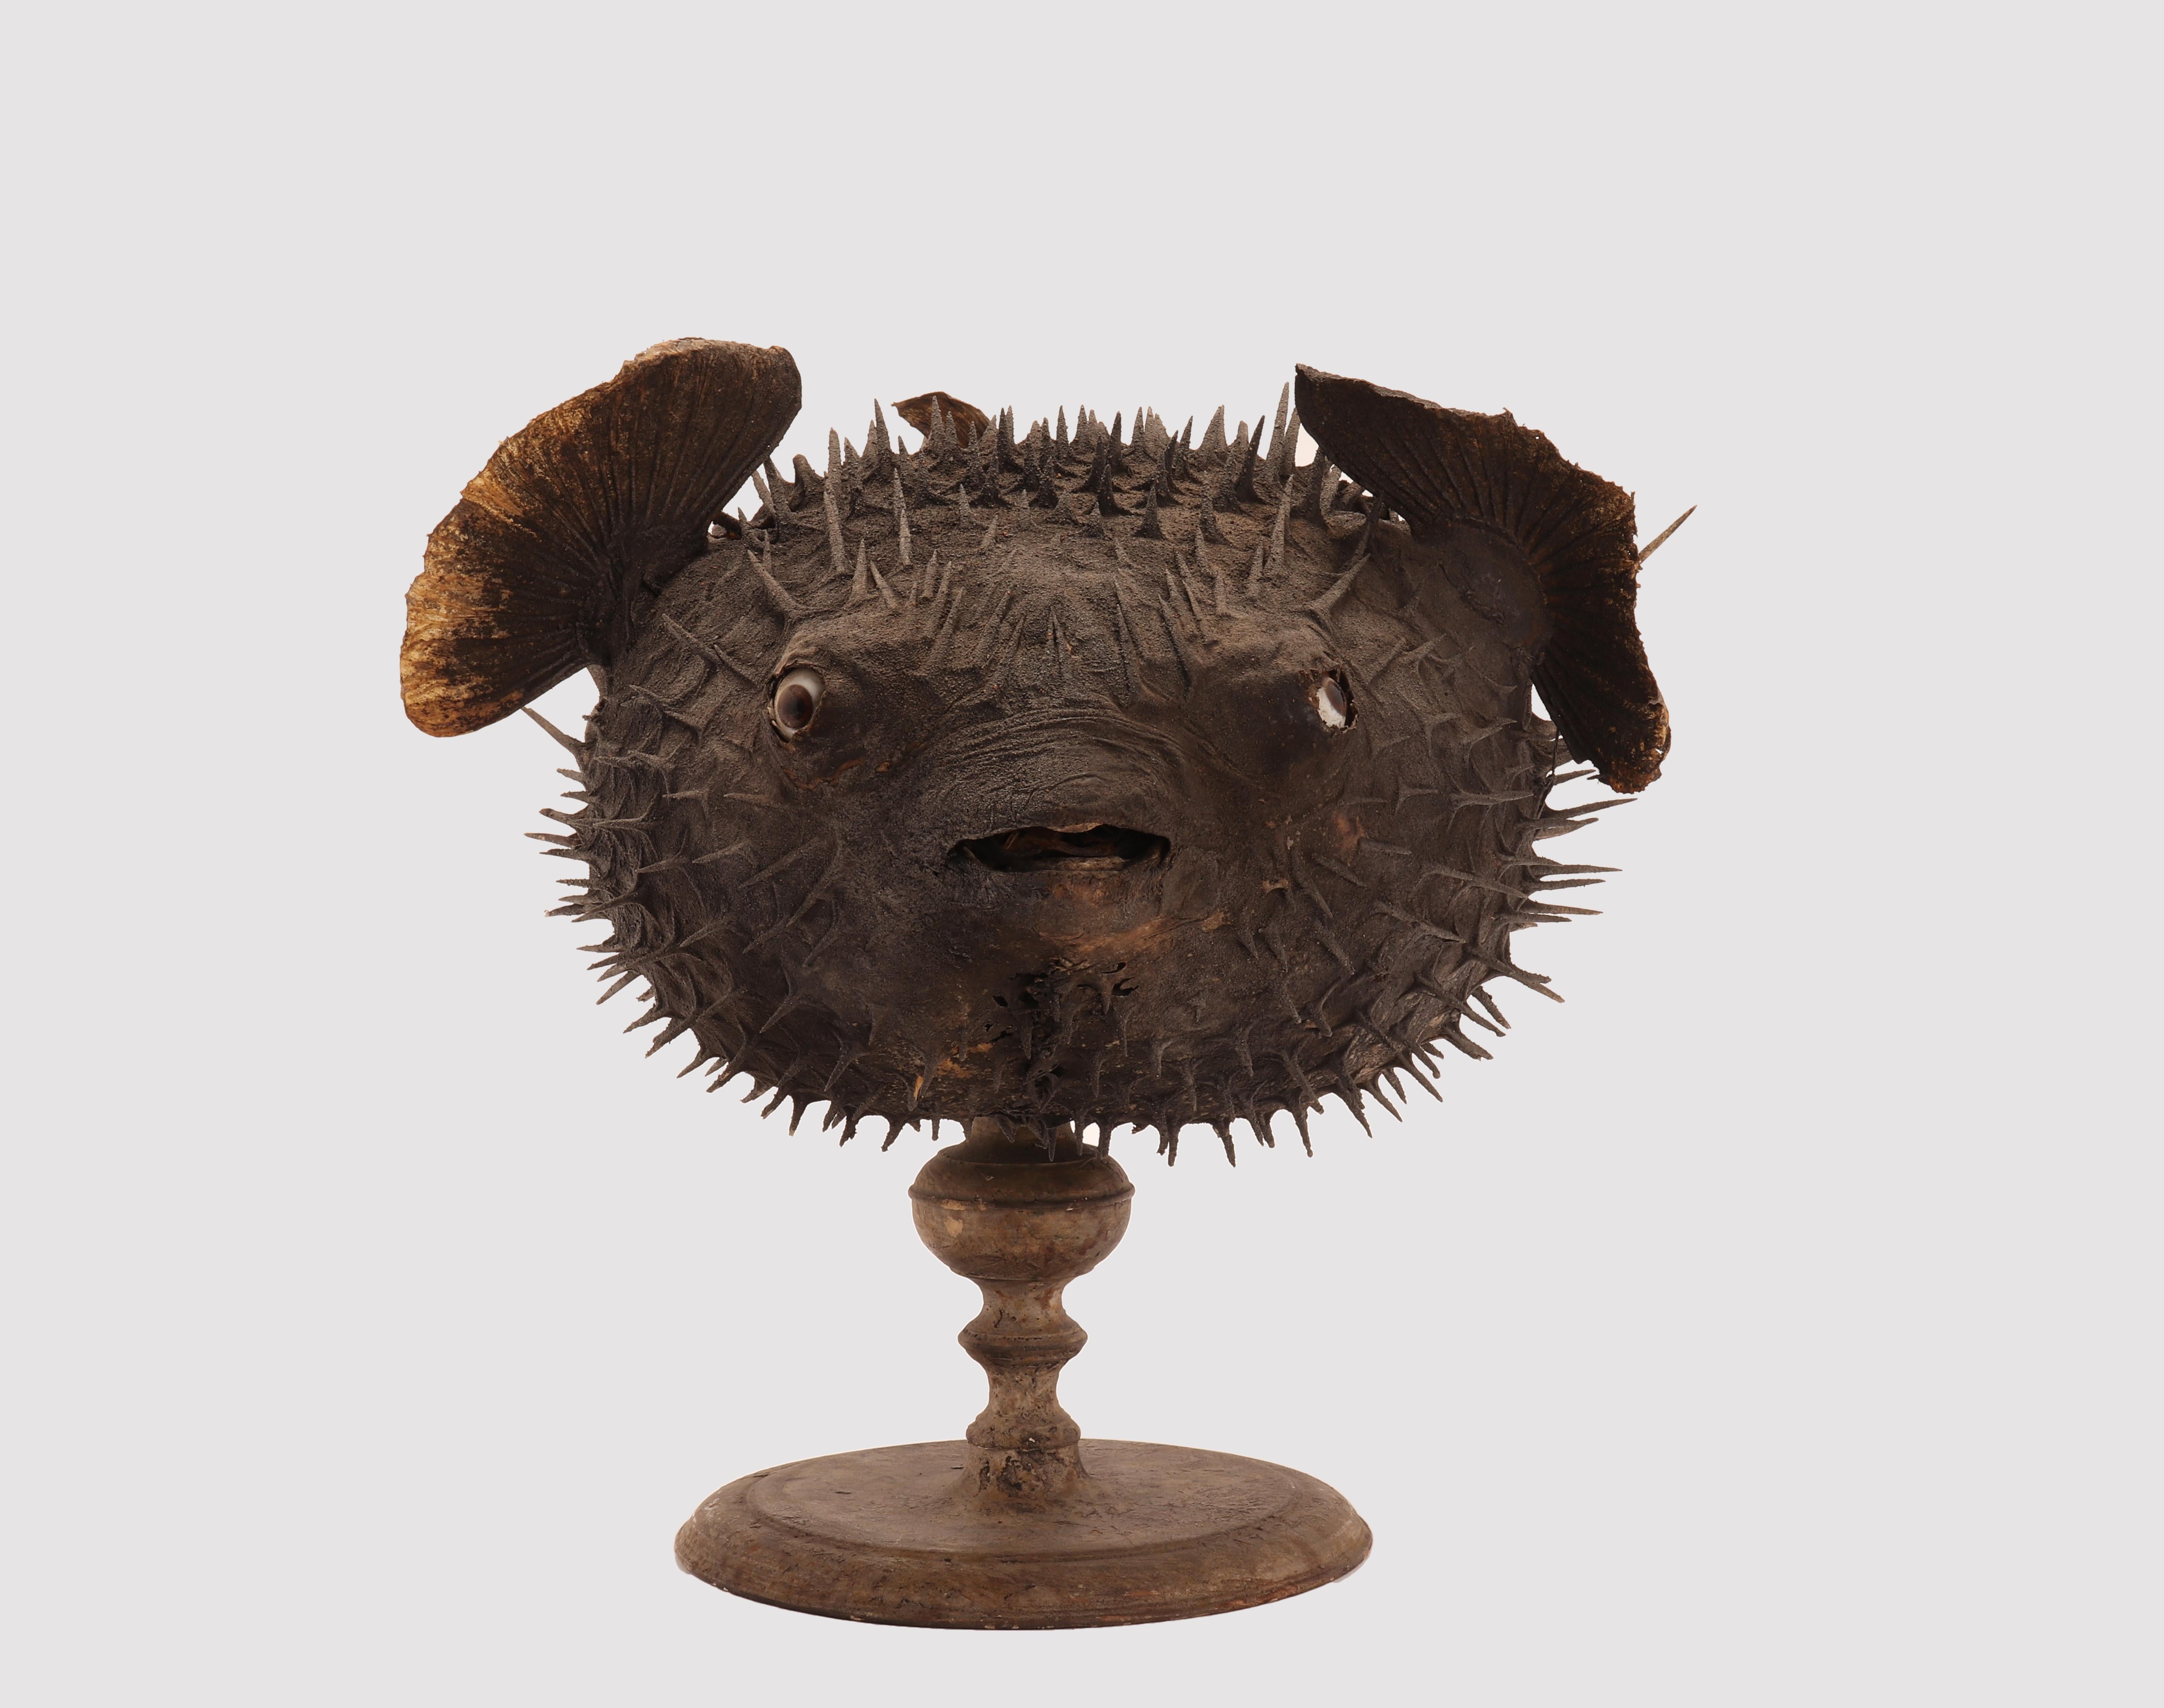 Taxidermy marine natural Wunderkammer specimen, the common porcupine fish (Tetrodon Cutcutia). The Specimen is stuffed and mounted over a round dark wooden base. Sulphur glass eyes. Italy circa 1870.